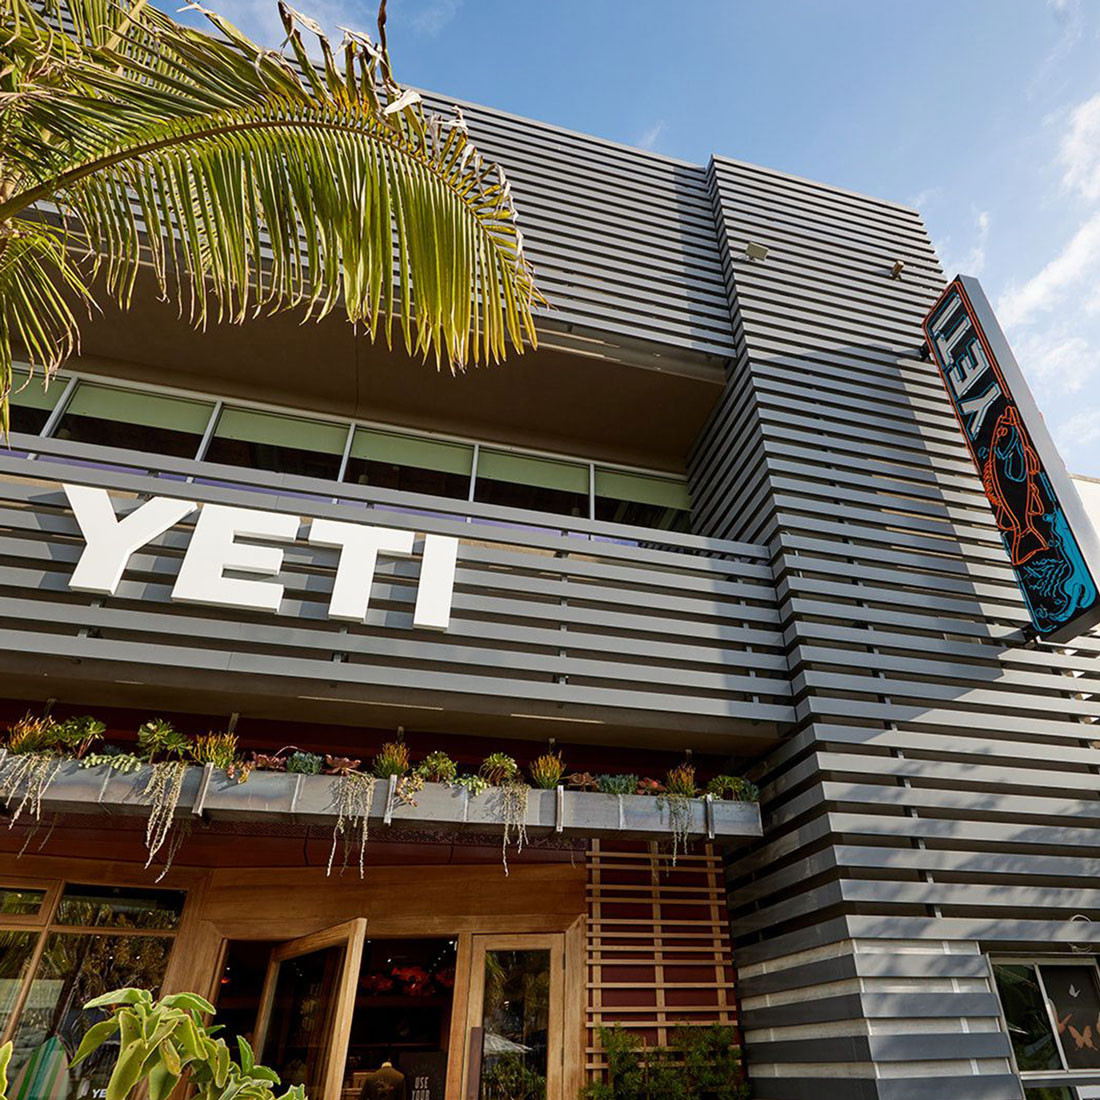 Photo outside the Yeti store in El Segundo with a gray wood slat exterior facade.